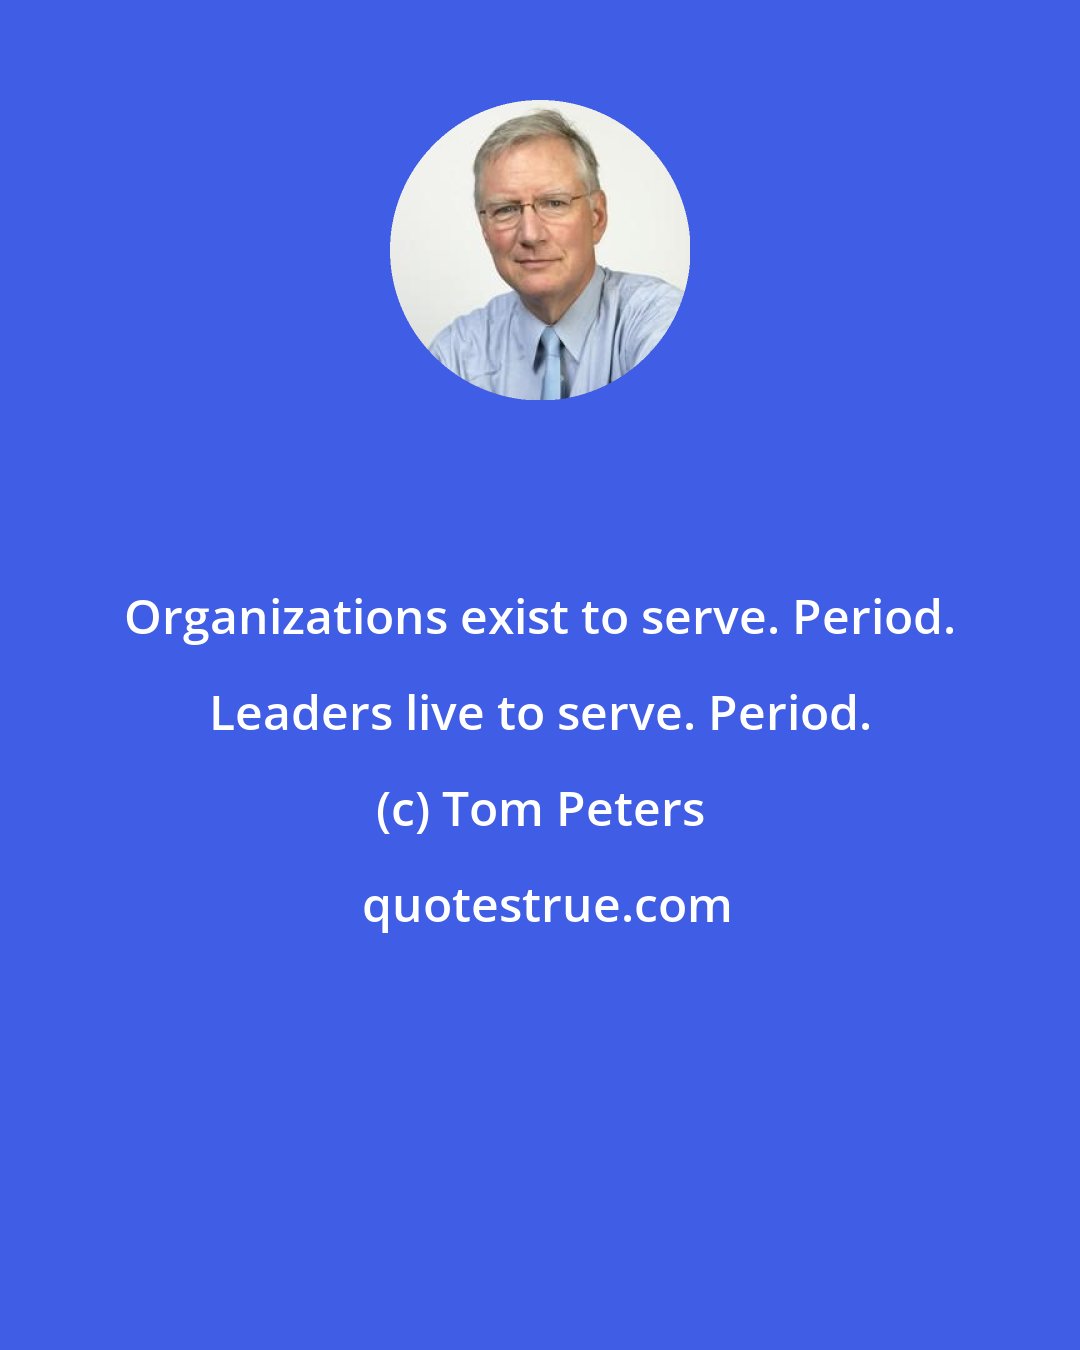 Tom Peters: Organizations exist to serve. Period. Leaders live to serve. Period.